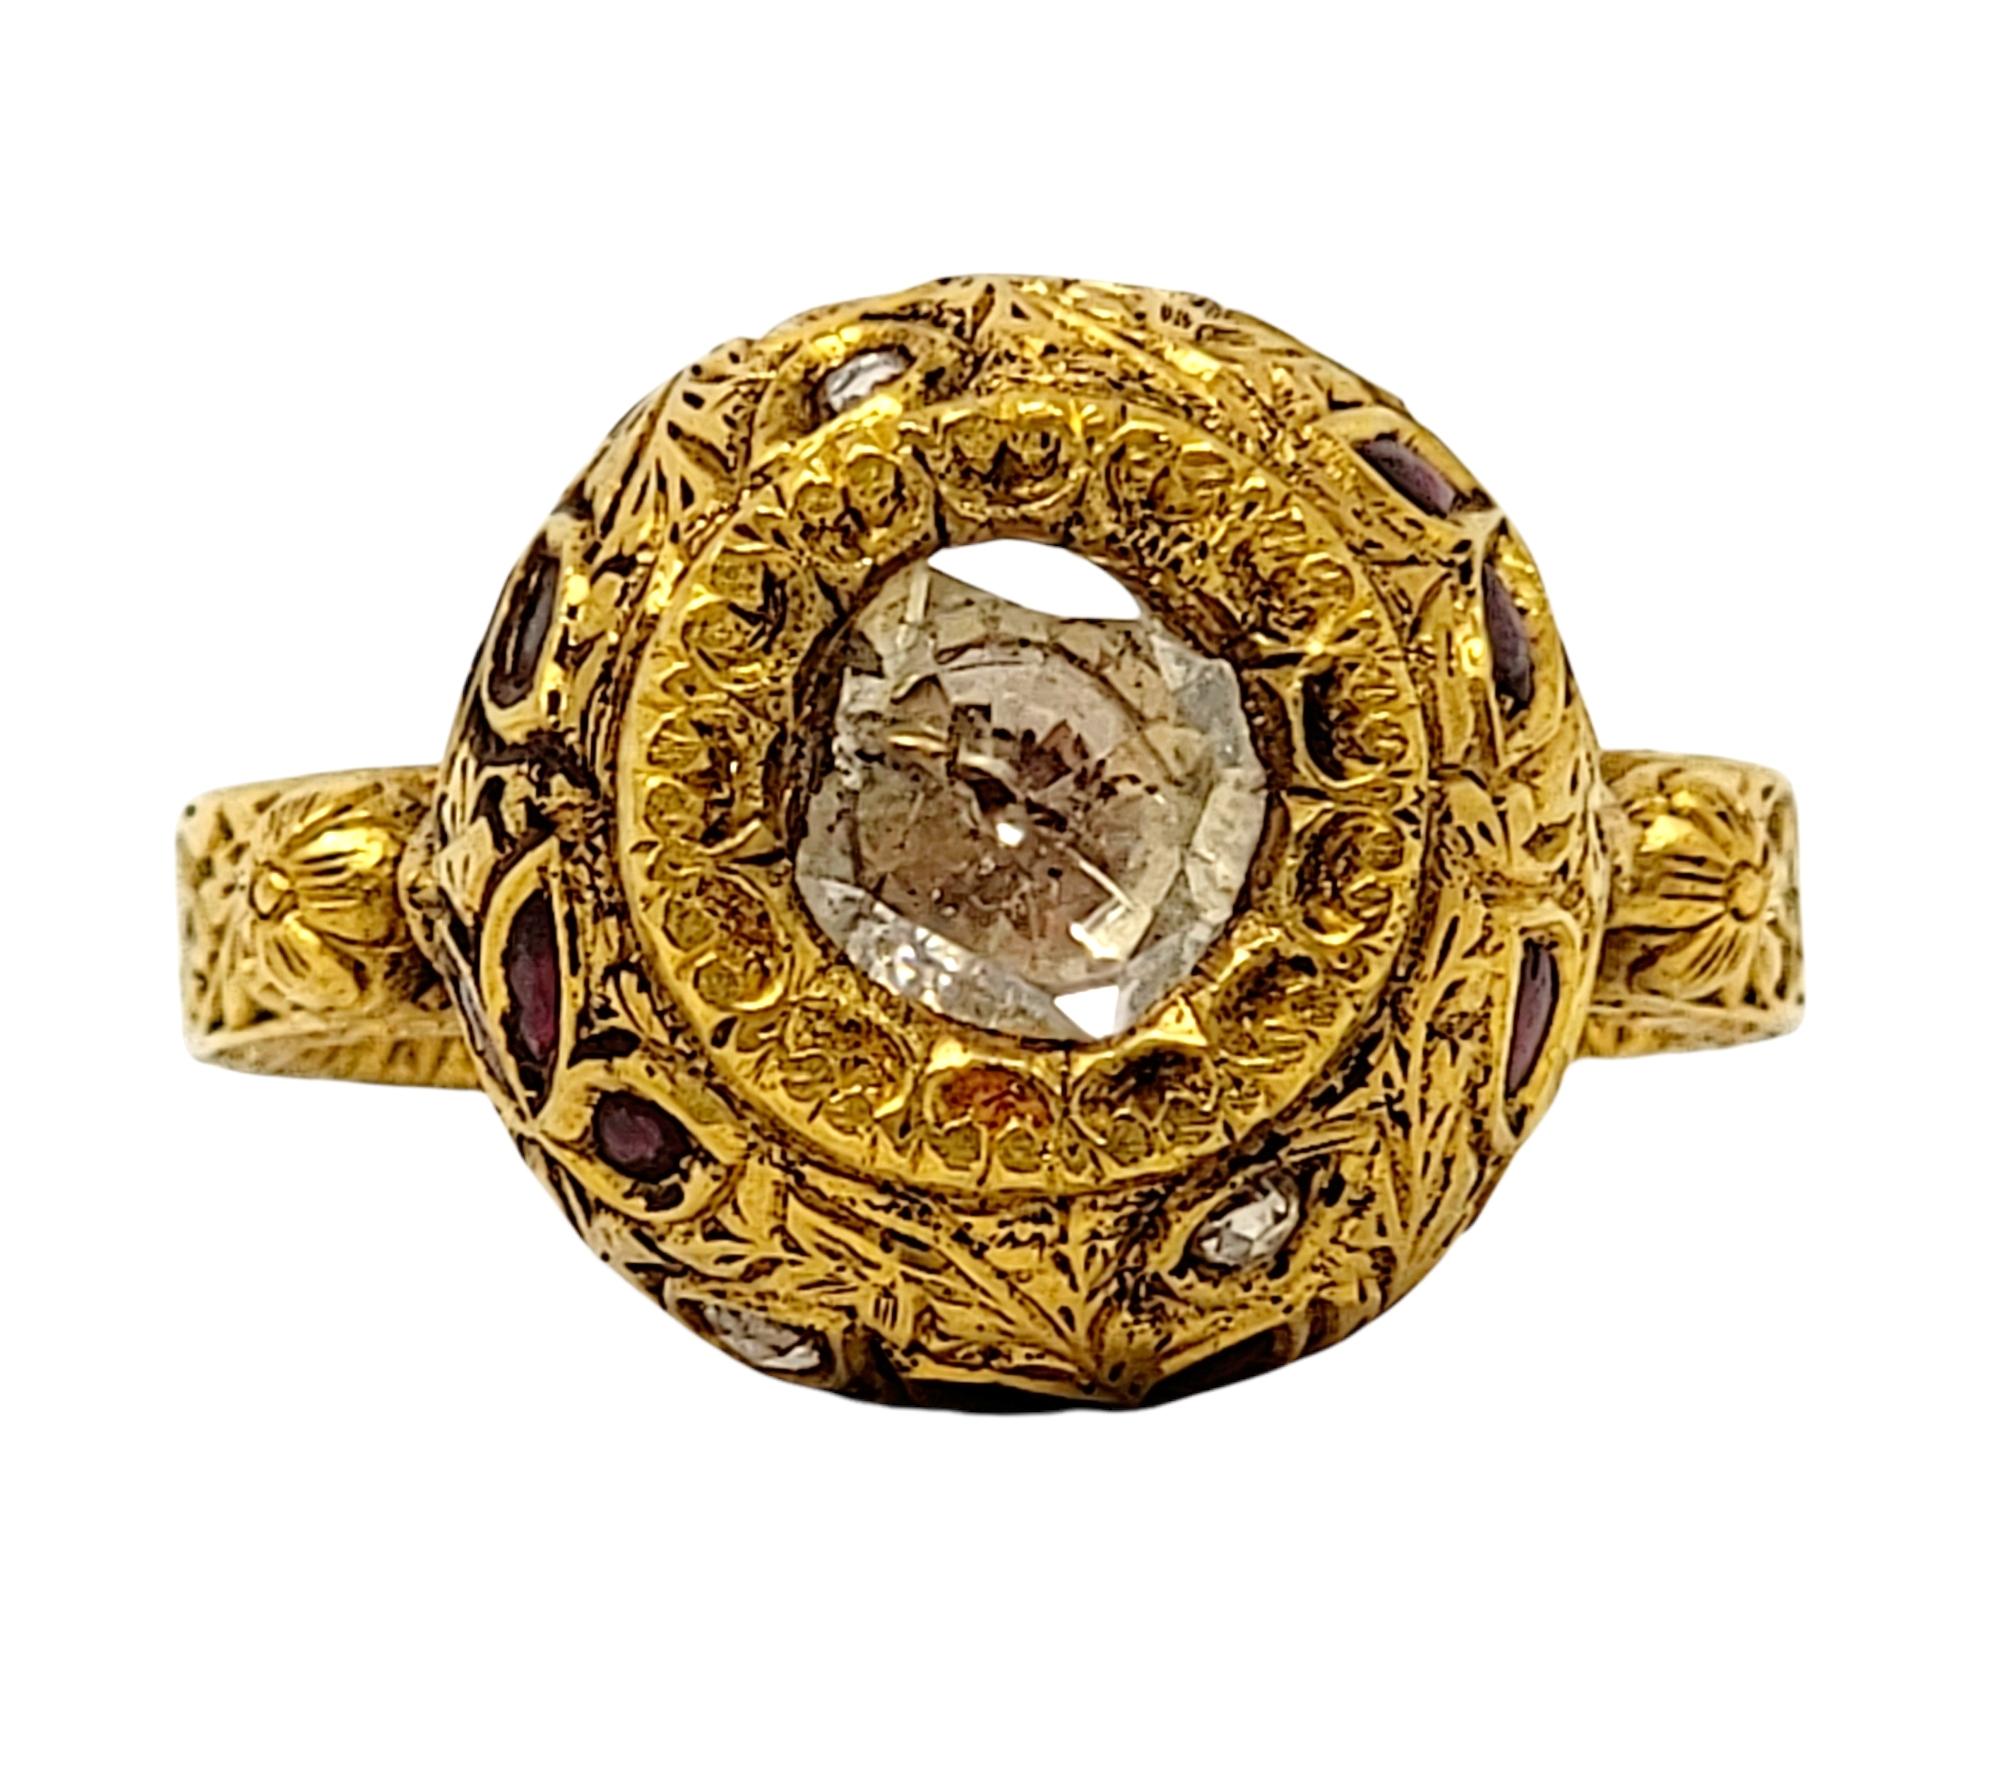 Ring size: 9

Incredible 21 karat yellow gold and diamond Polki ring makes a bold statement. Featuring colorful red enamel detailing paired with ornate engravings, this ring is an absolute work of art. 

Ring Style: Cocktail
Metal: 21 Karat Yellow